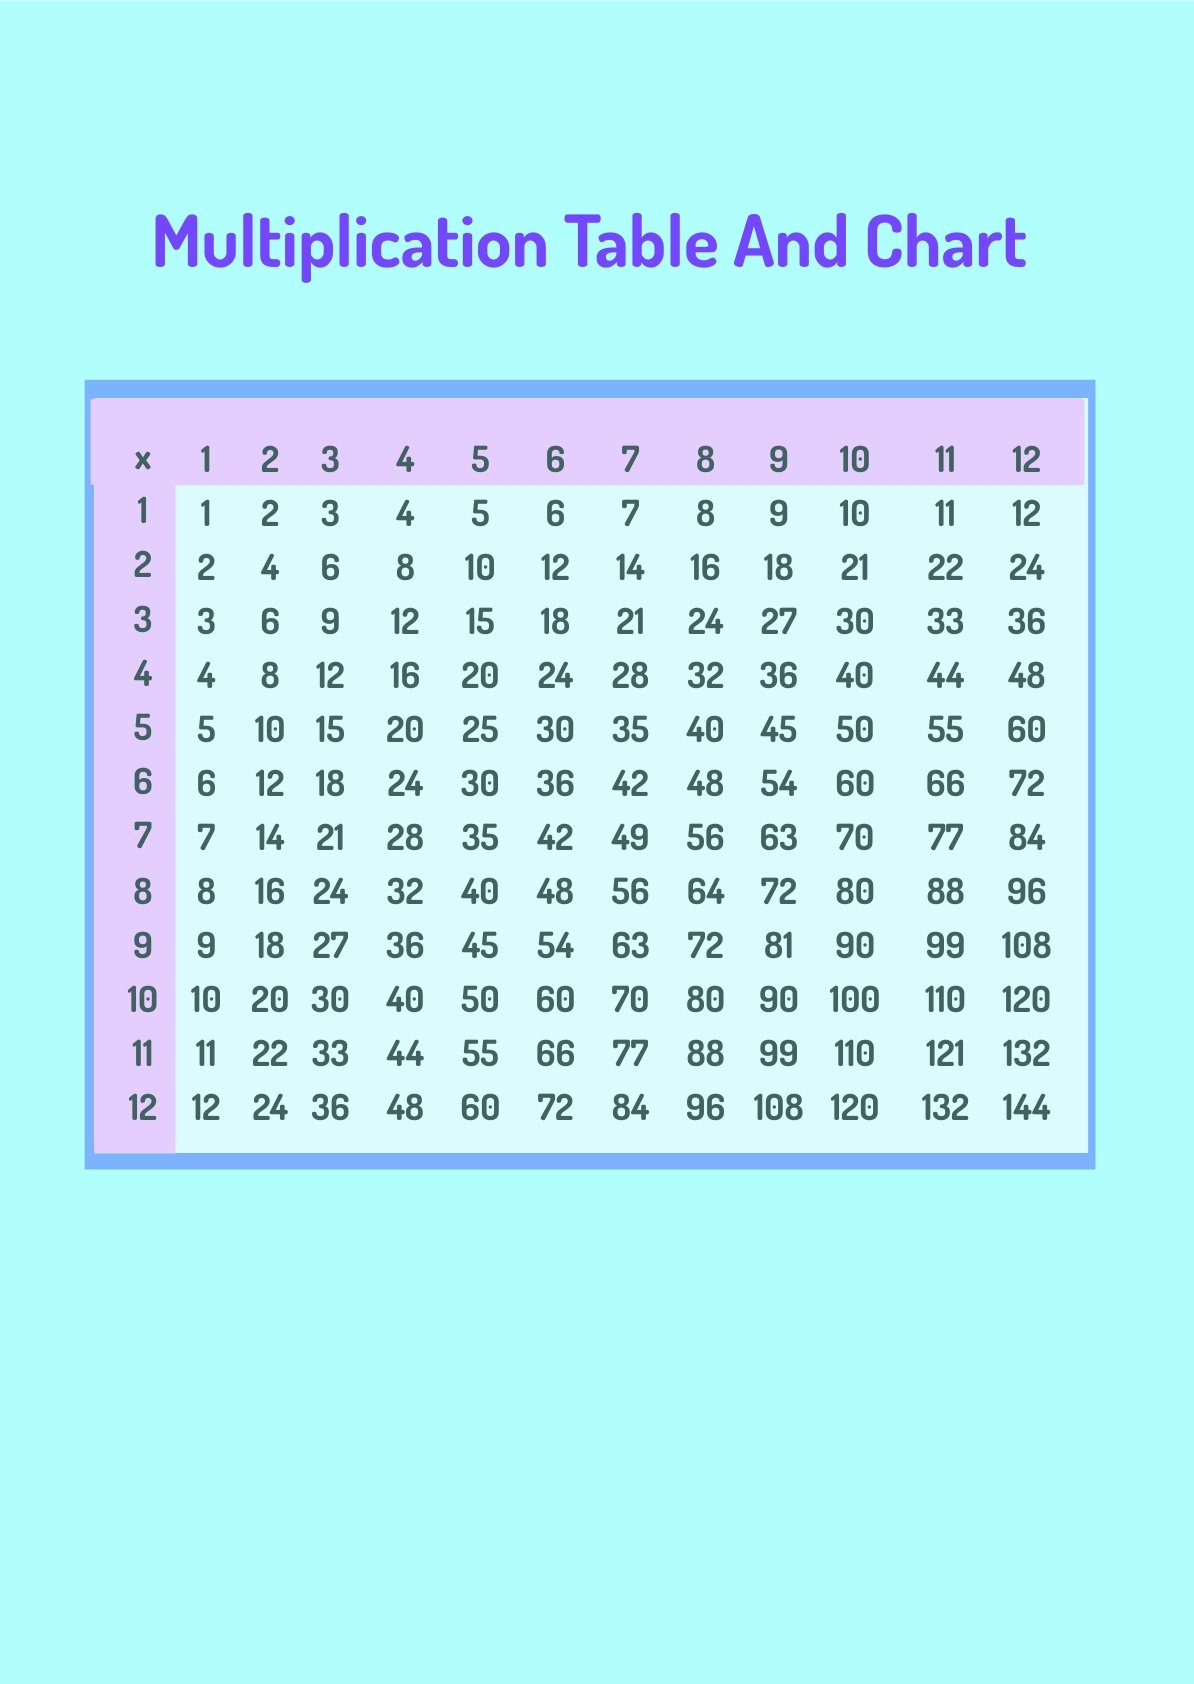 Multiplication Table And Chart